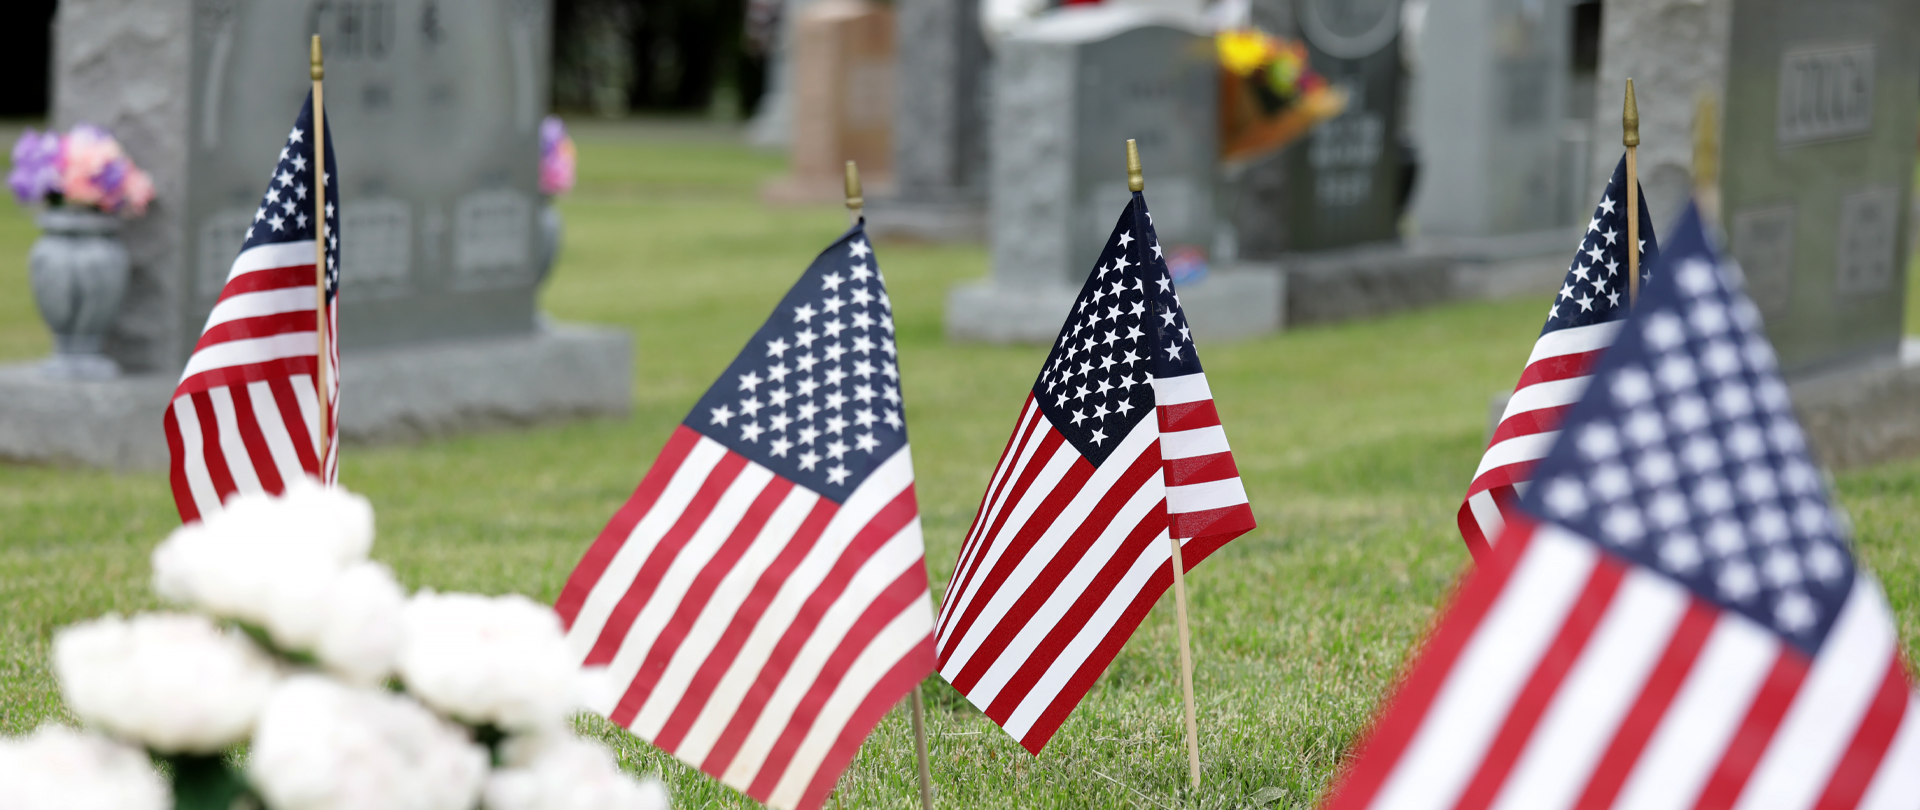 Memorial Day Observances
Breakfast, May 18  Register now
Flag Ceremony, May 16
Memorial Wall
